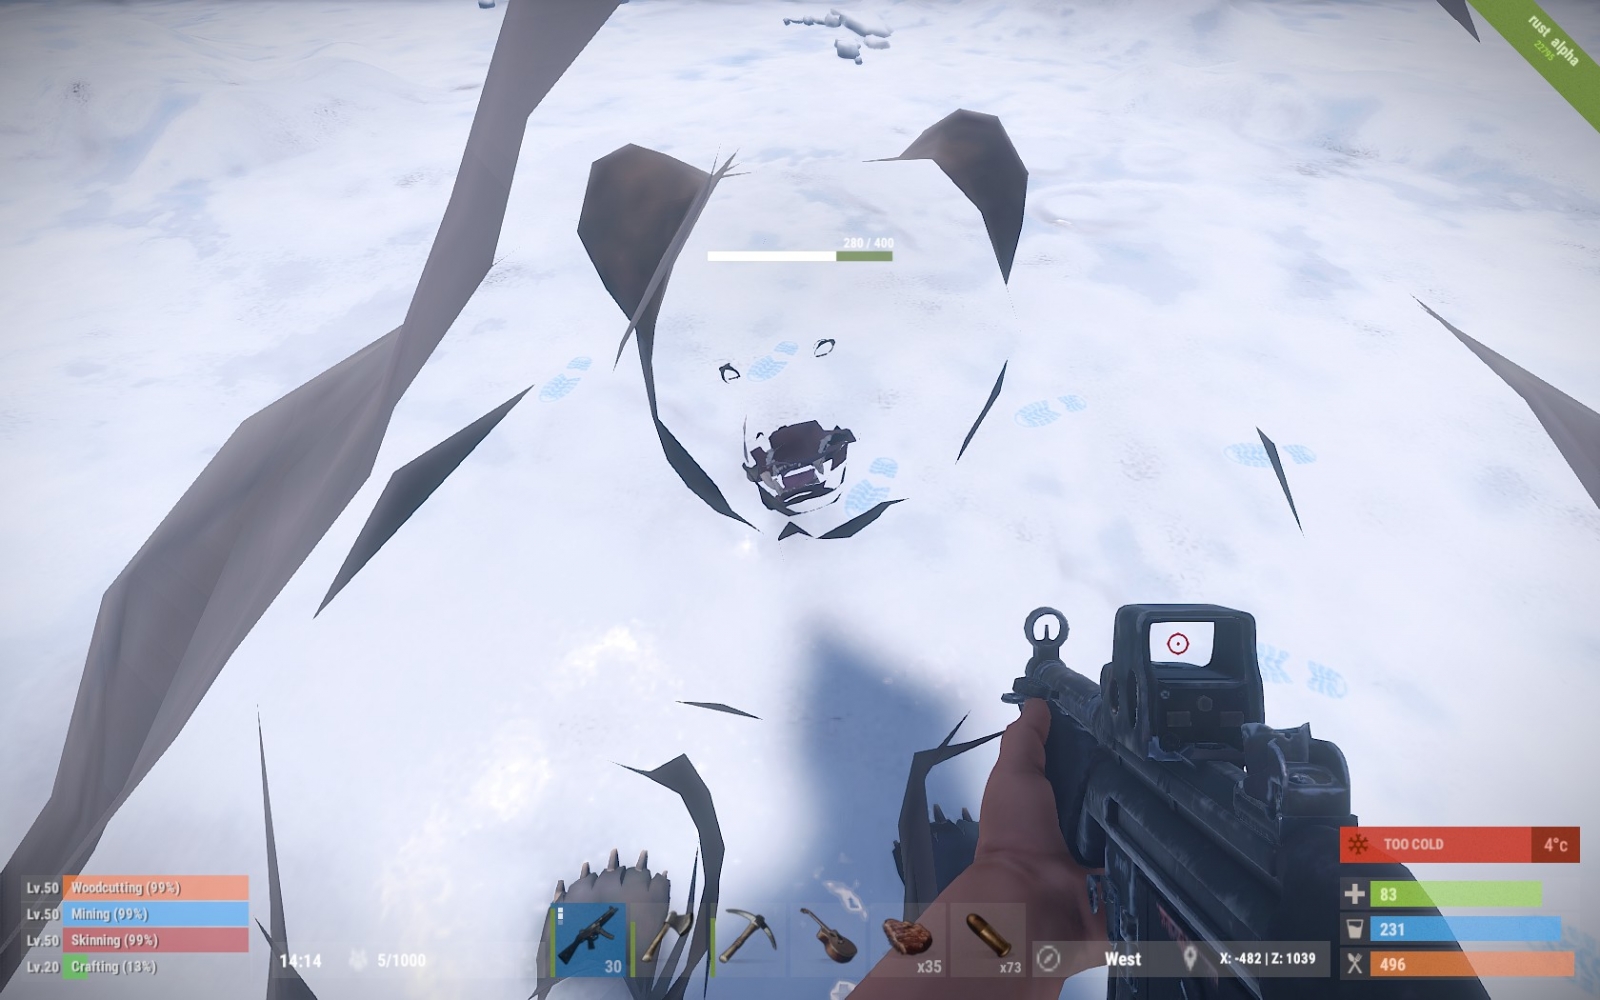 To defeat the bear you must get inside the bear's head.